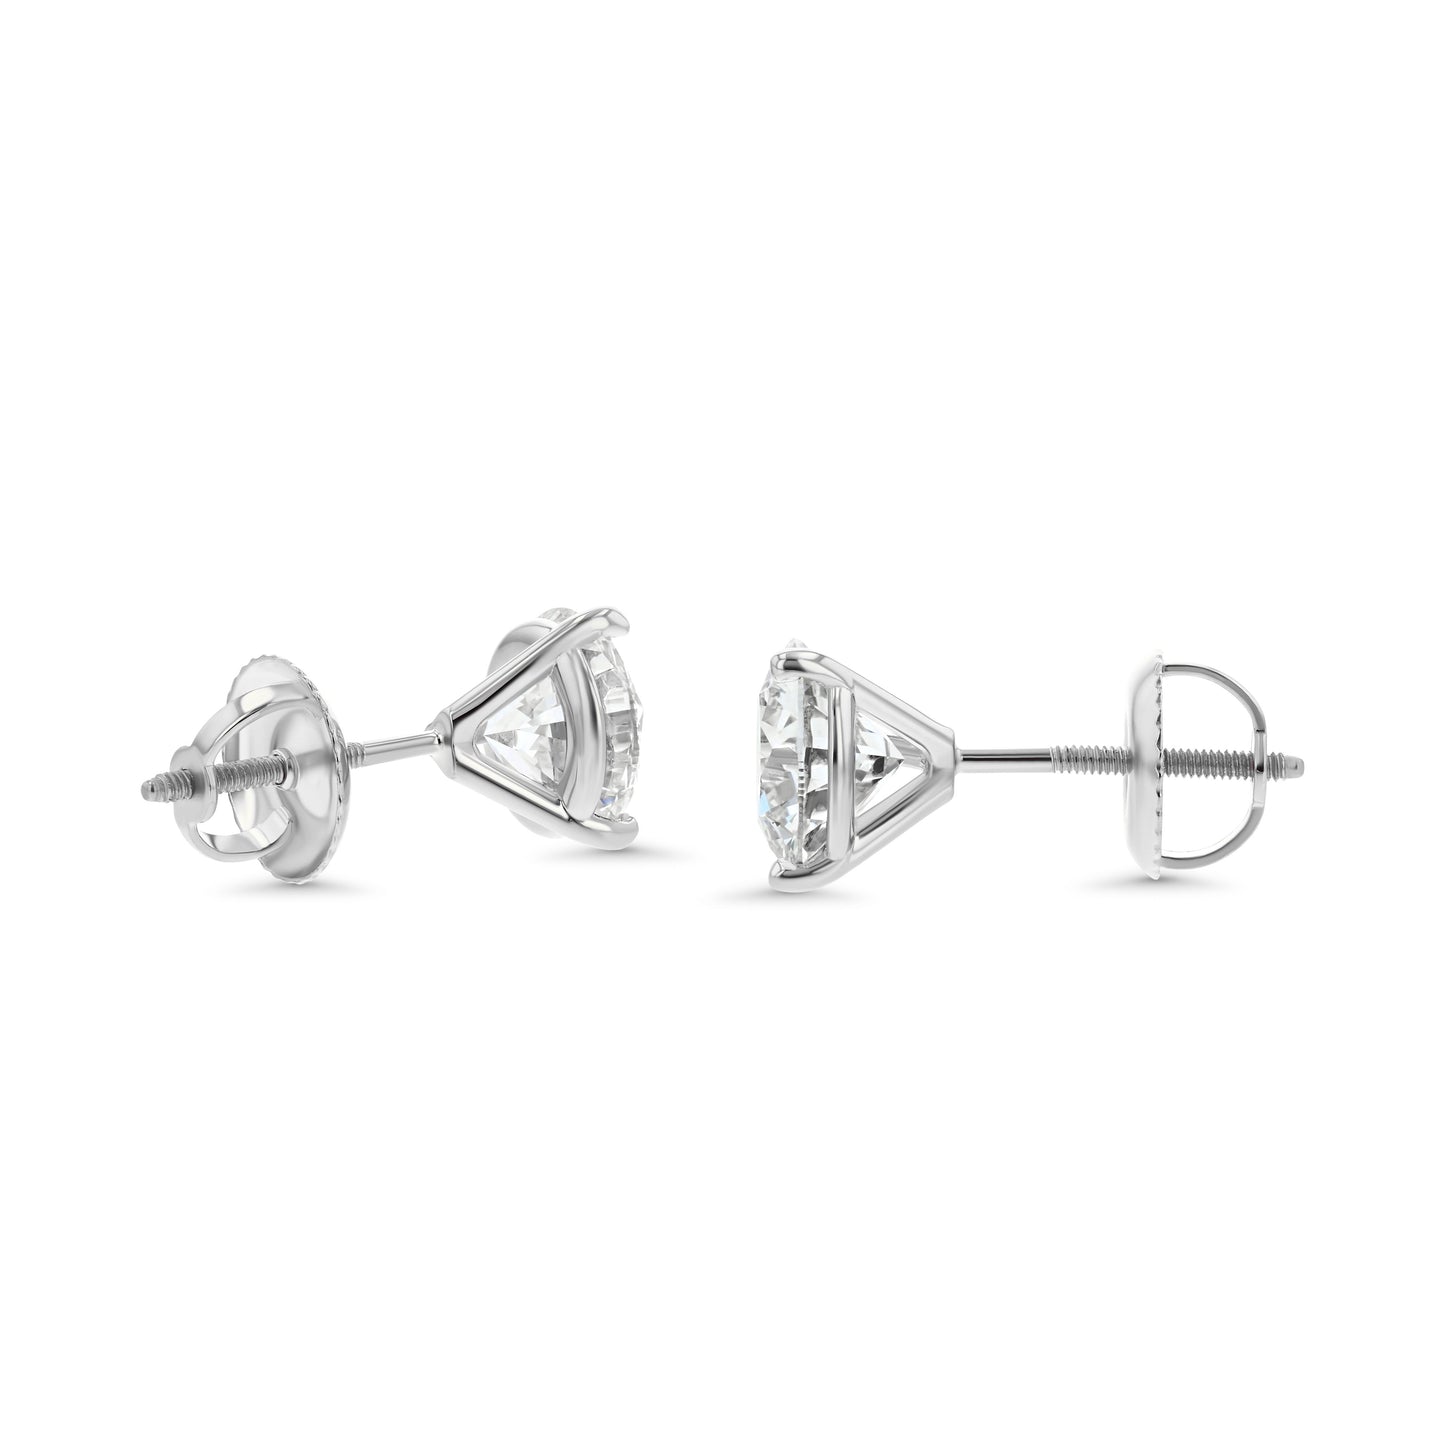 14k White Gold 3-prong Martini Round Diamond Stud Earrings 1ctw (5.0mm Ea), G Color, Si3 Clarity